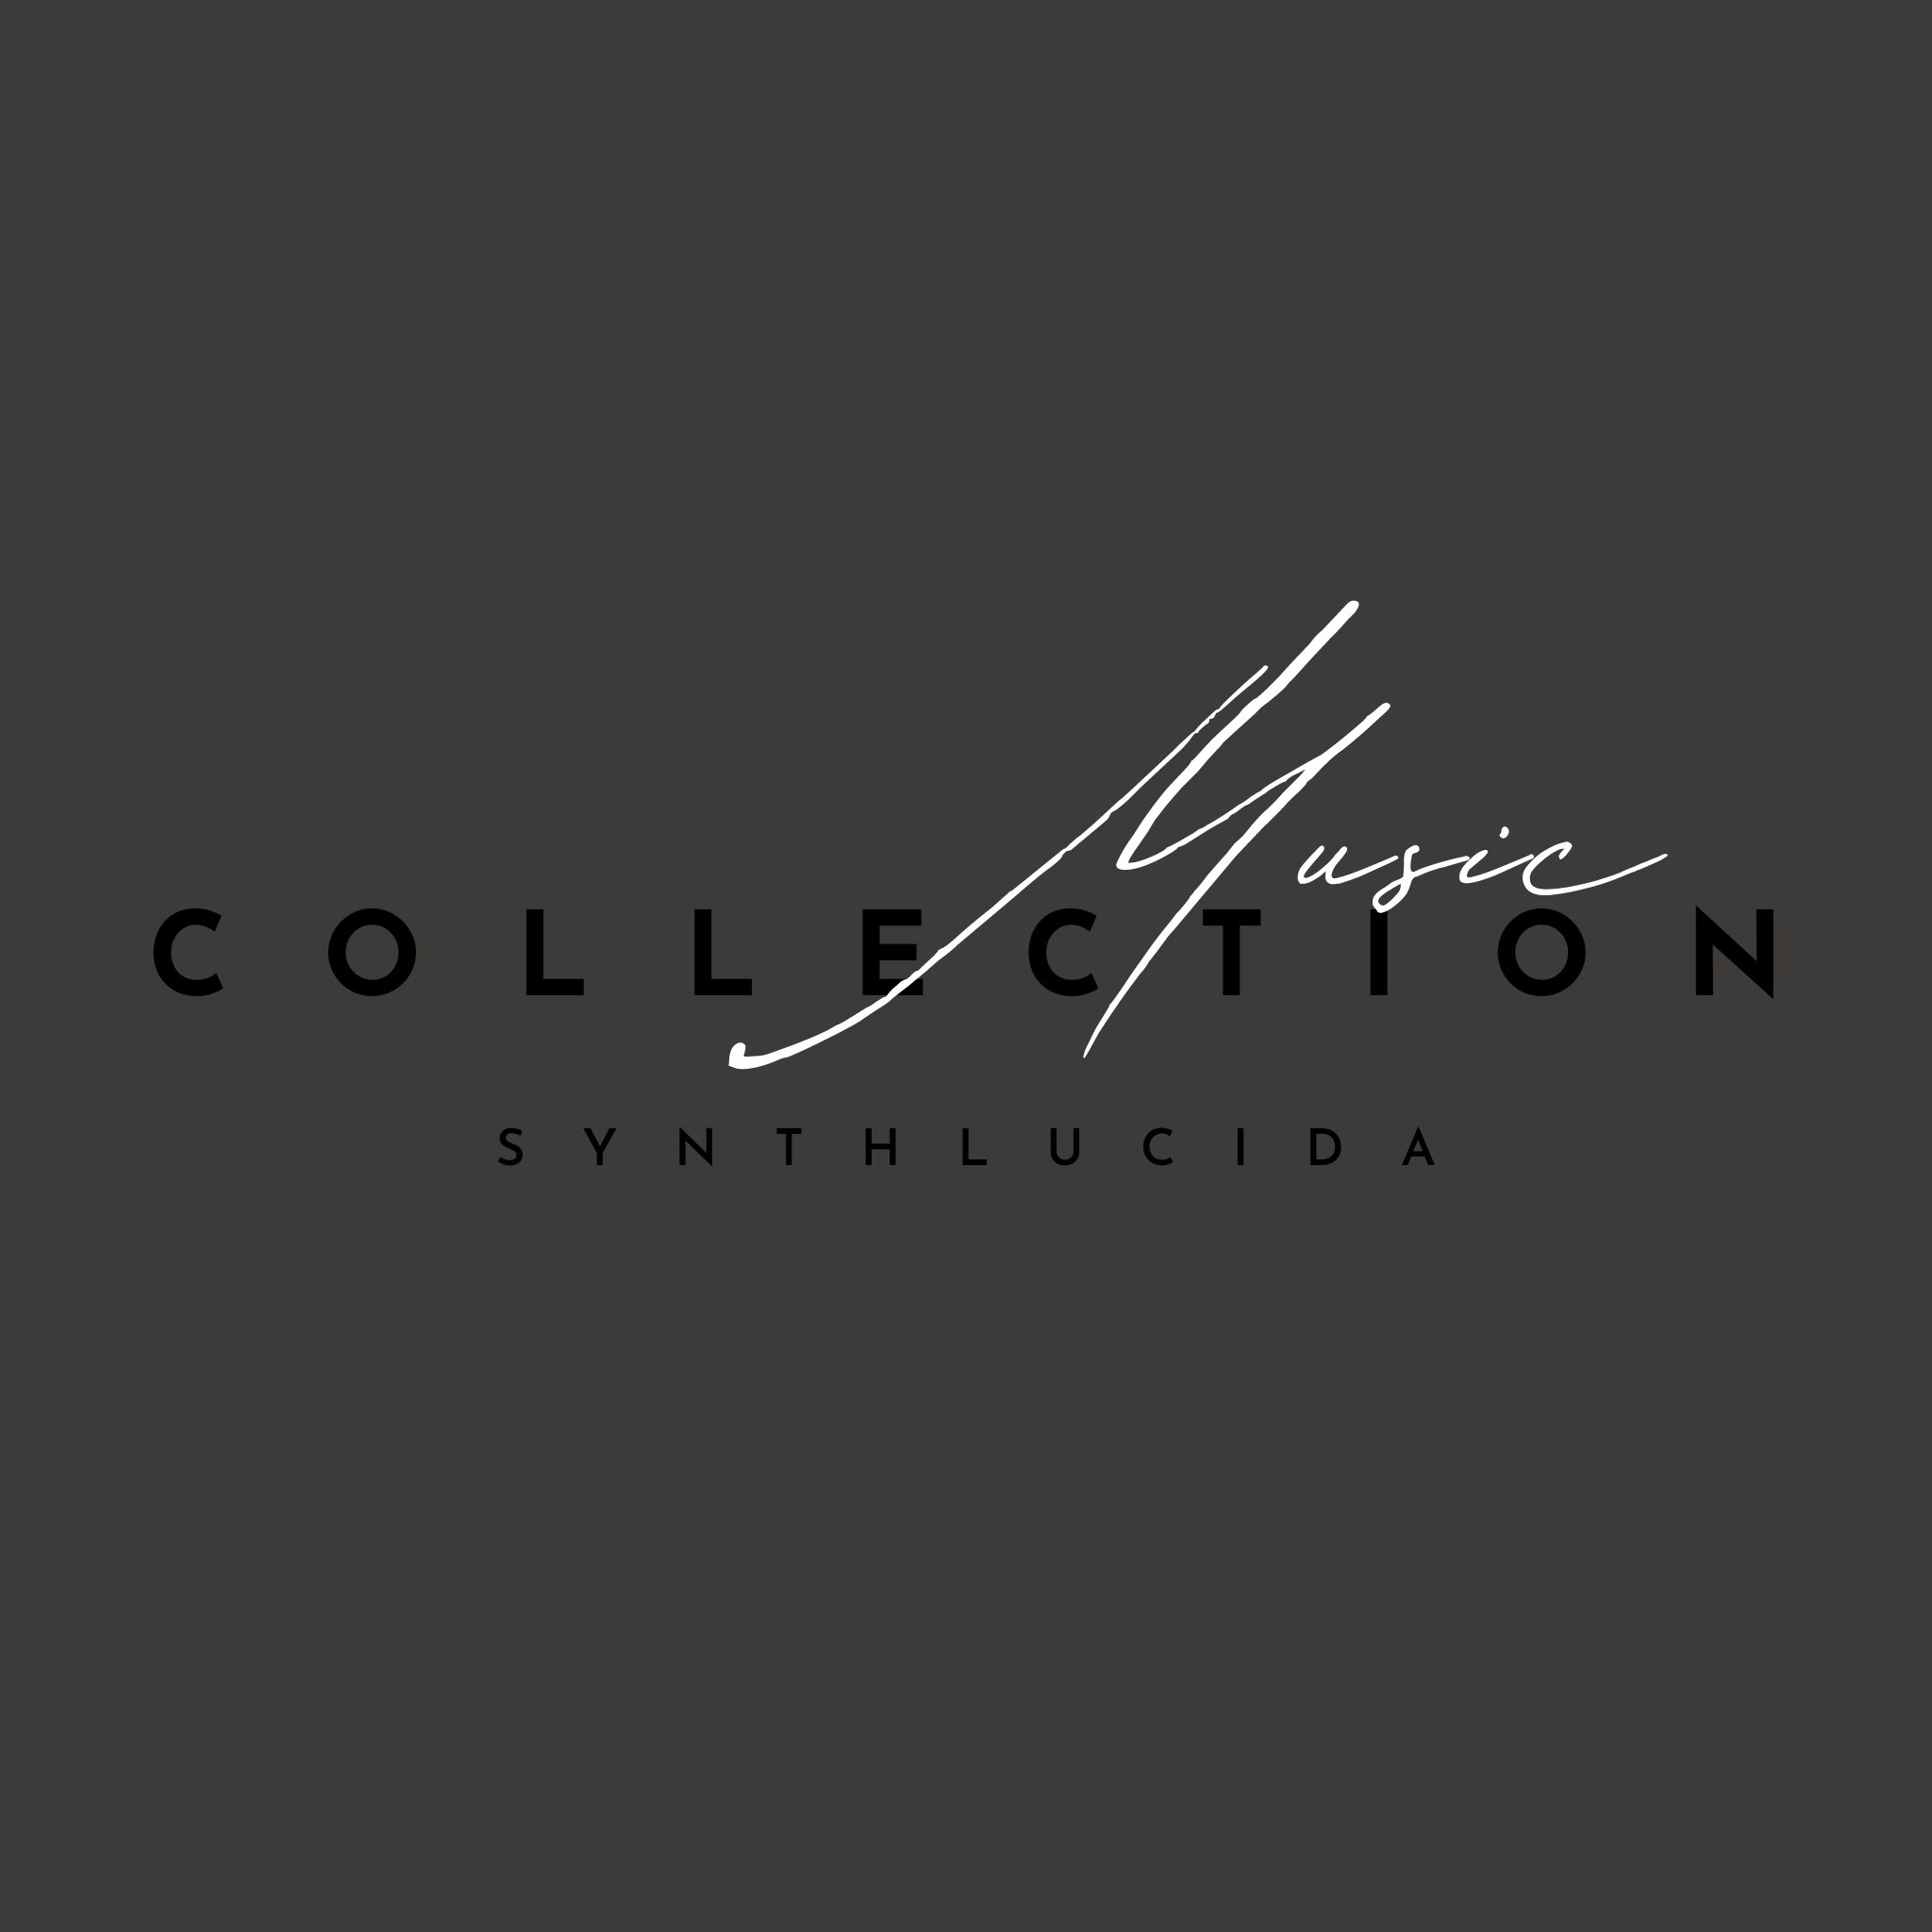 Music collection, sythlucida music. Independent chillout music.